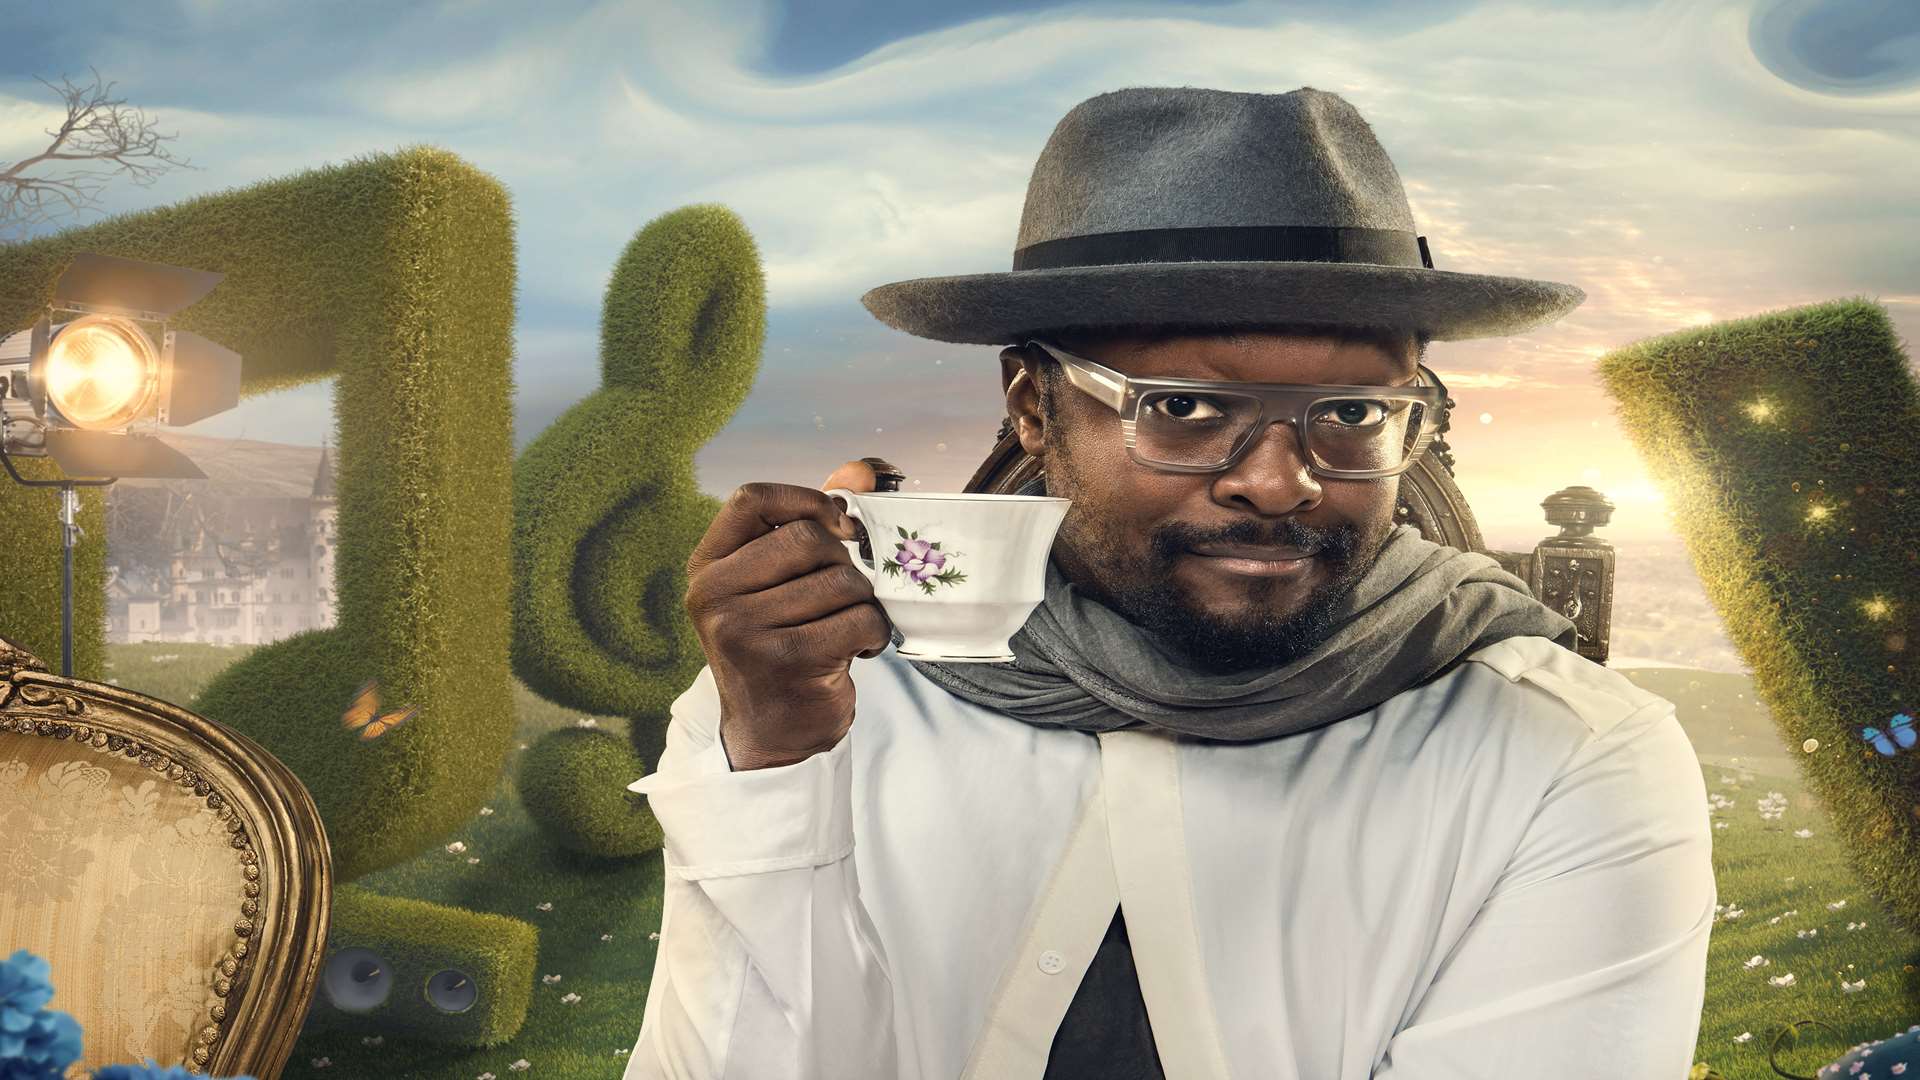 Will.i.am was flying to New York